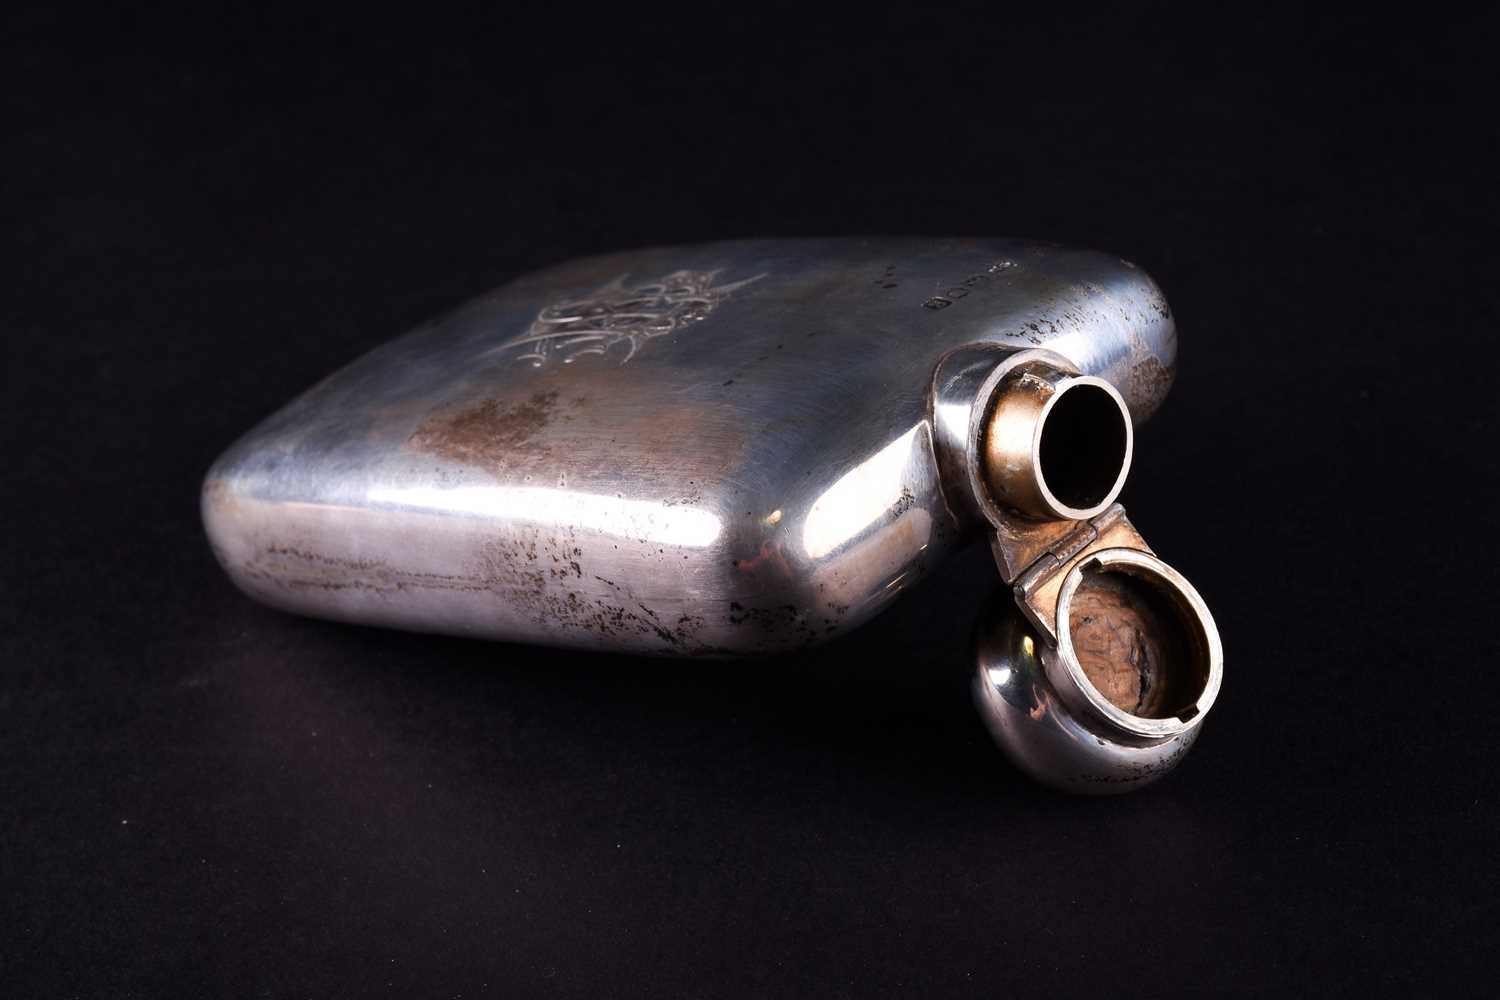 An Edwardian silver hip flask, Robert Pringle & Sons, London 1902, engraved with monogram IEH, 170g,